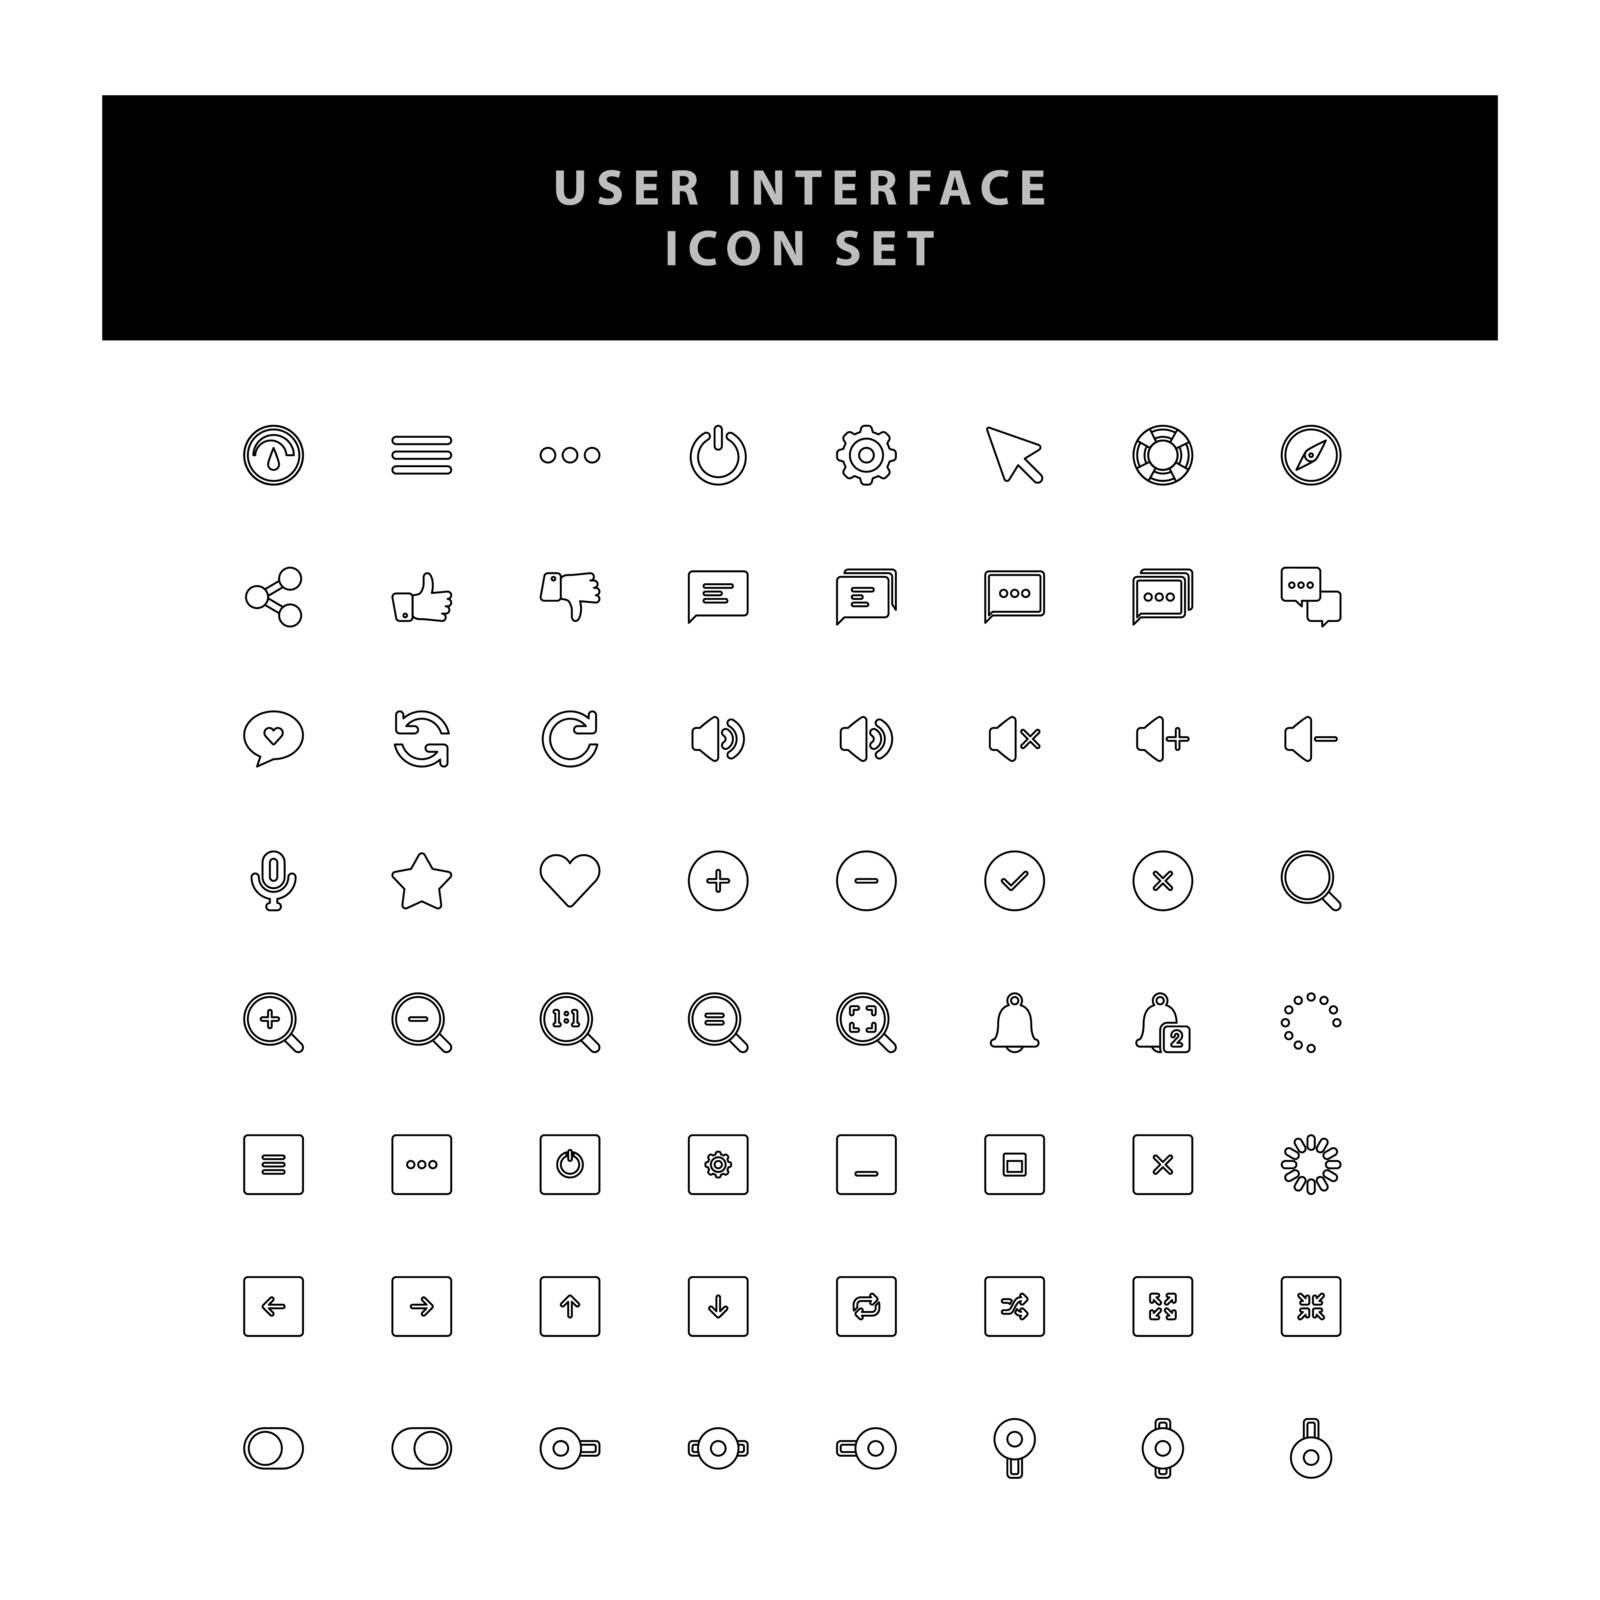 Basic user interface vector icons Set with outline design by ANITA